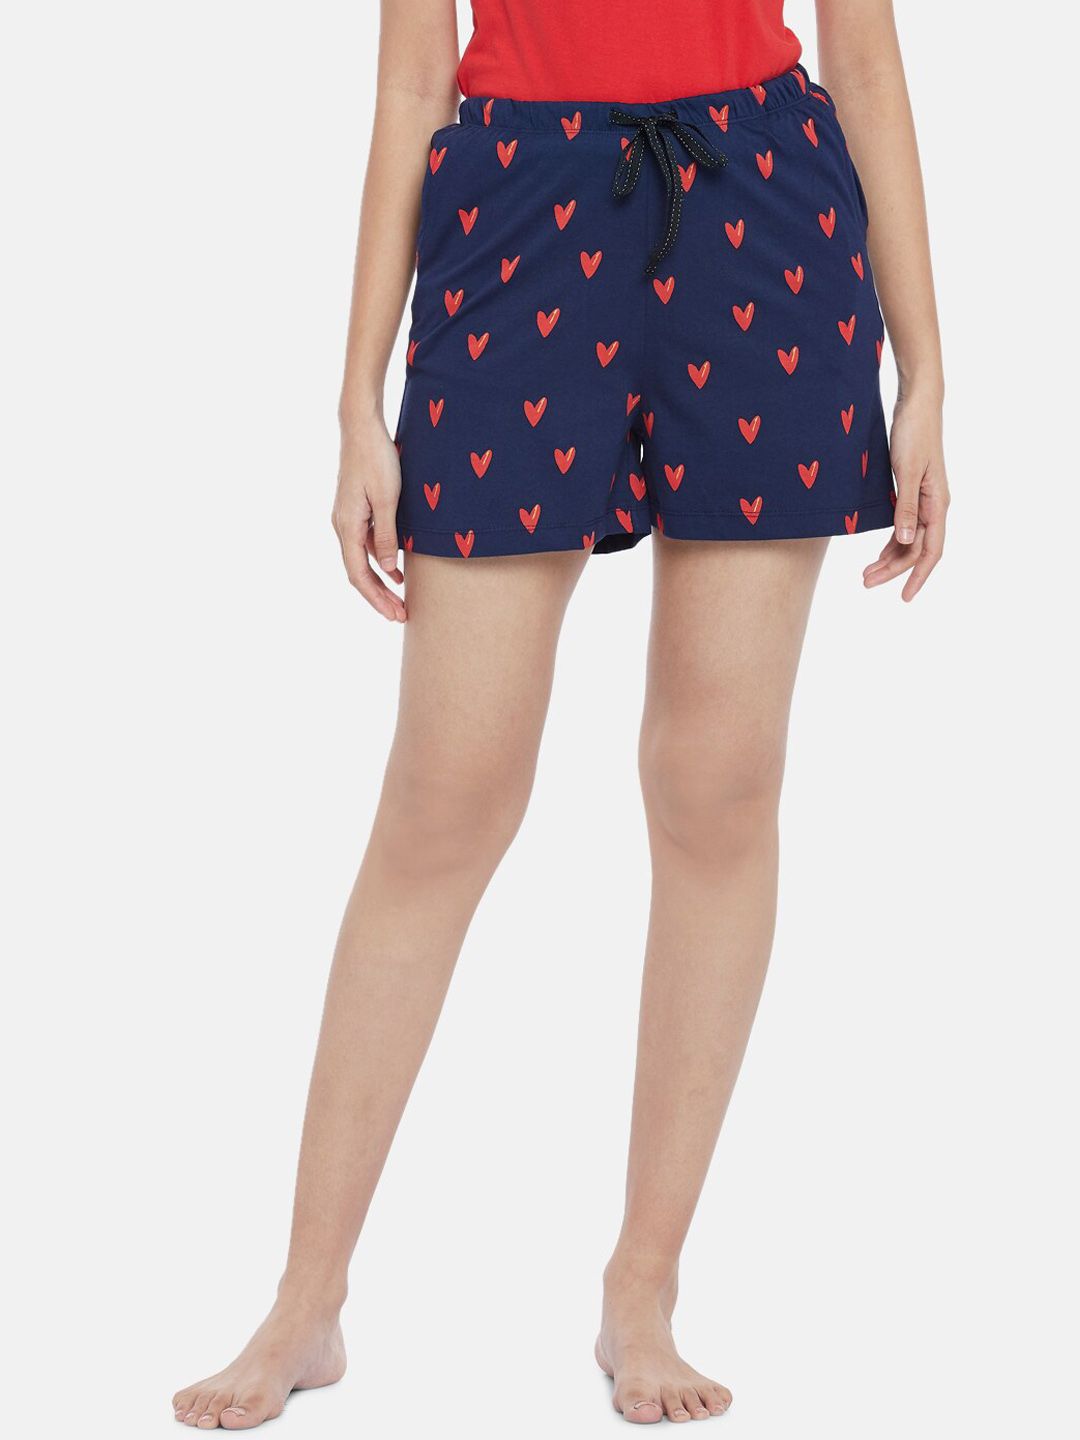 Dreamz by Pantaloons Women Navy Blue Hearts Printed Lounge Shorts Price in India